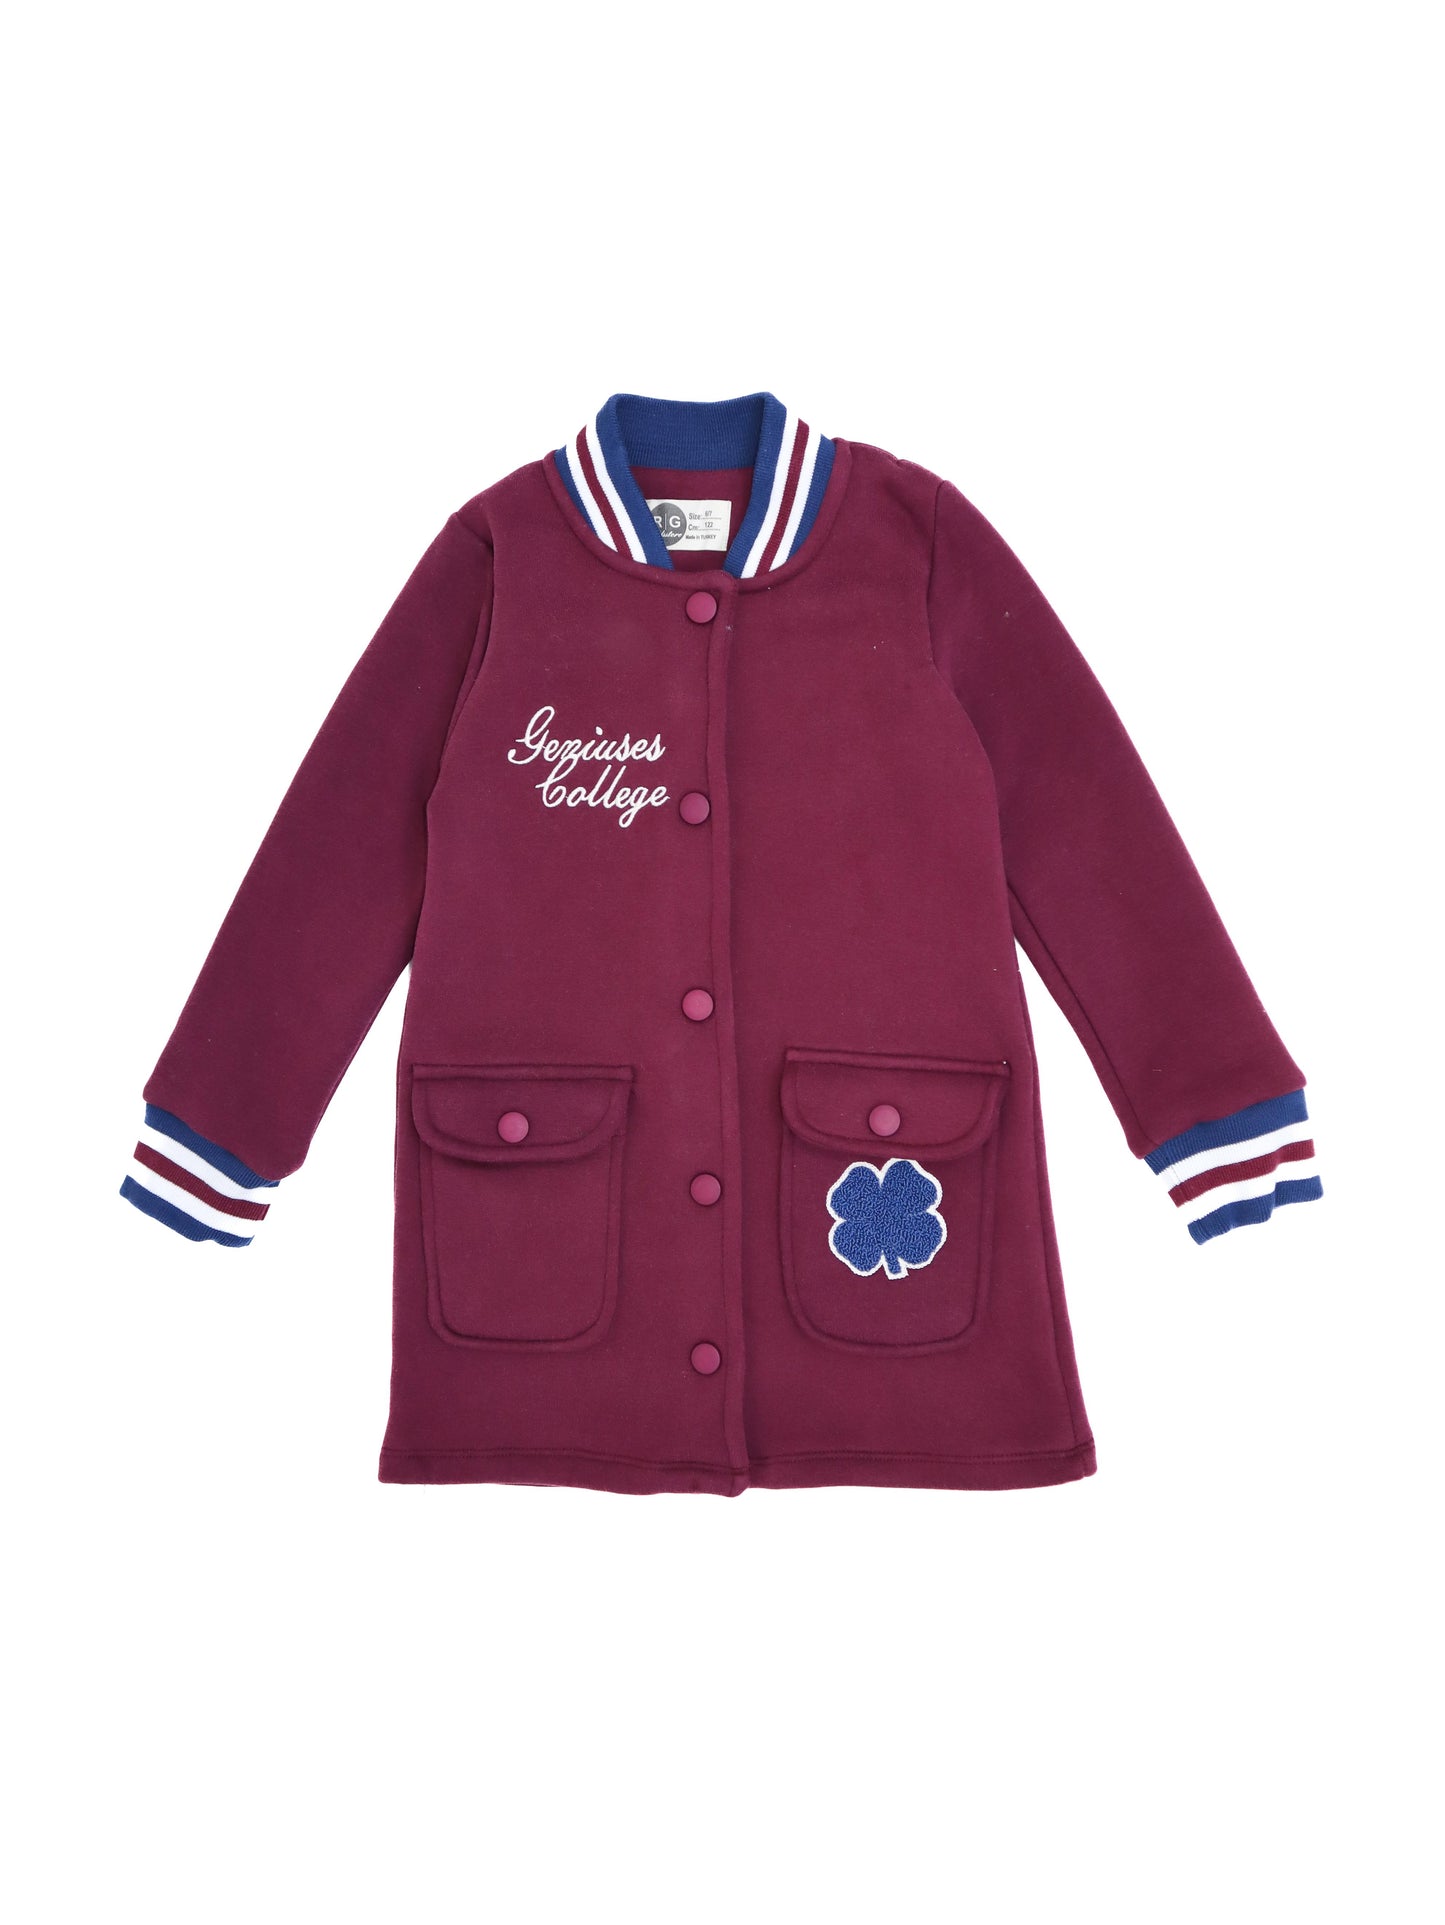 Girls' College Coat with Snaps on the Front